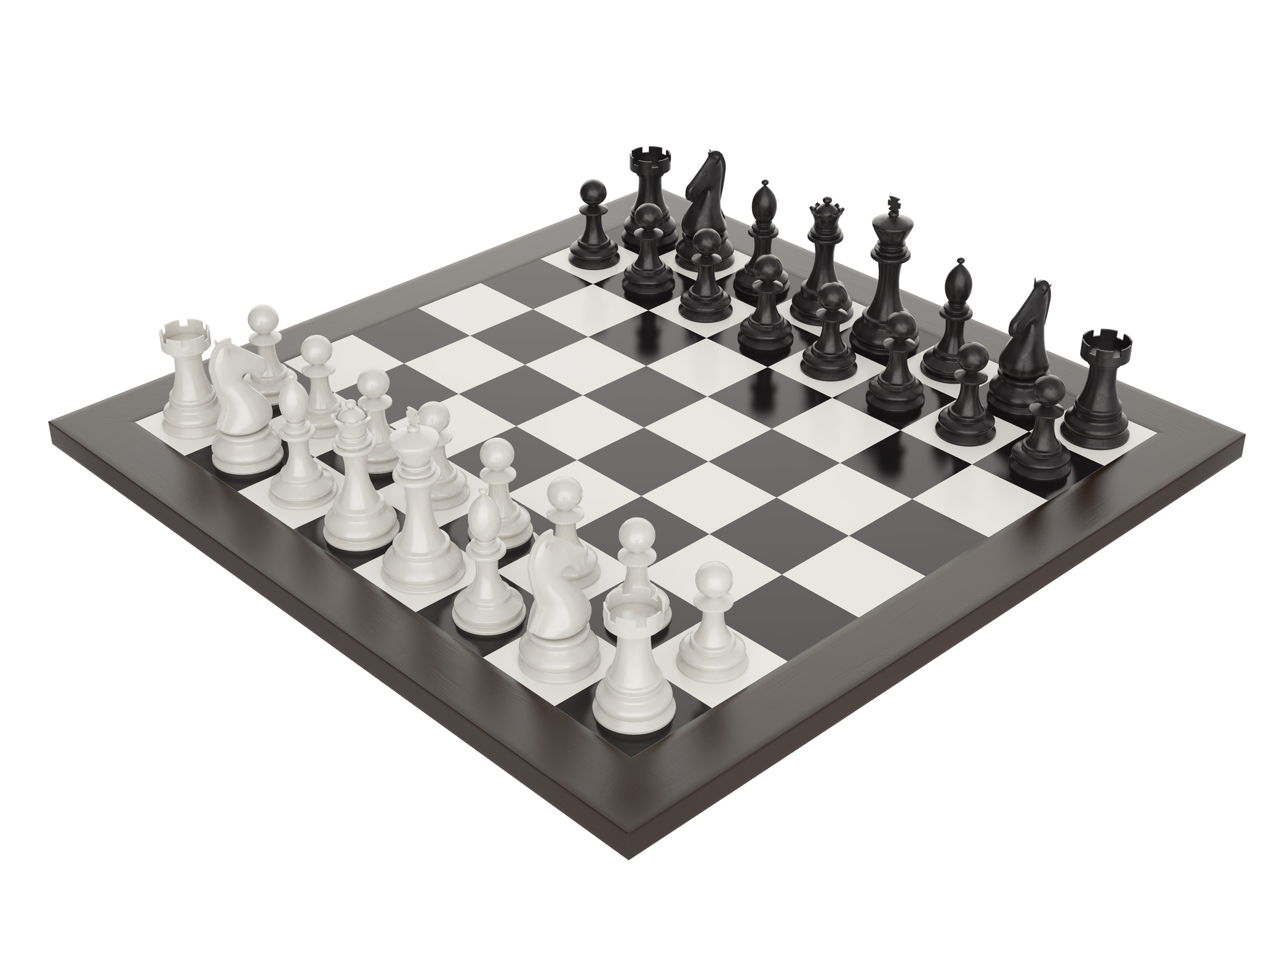 online sight s to play chess in real time